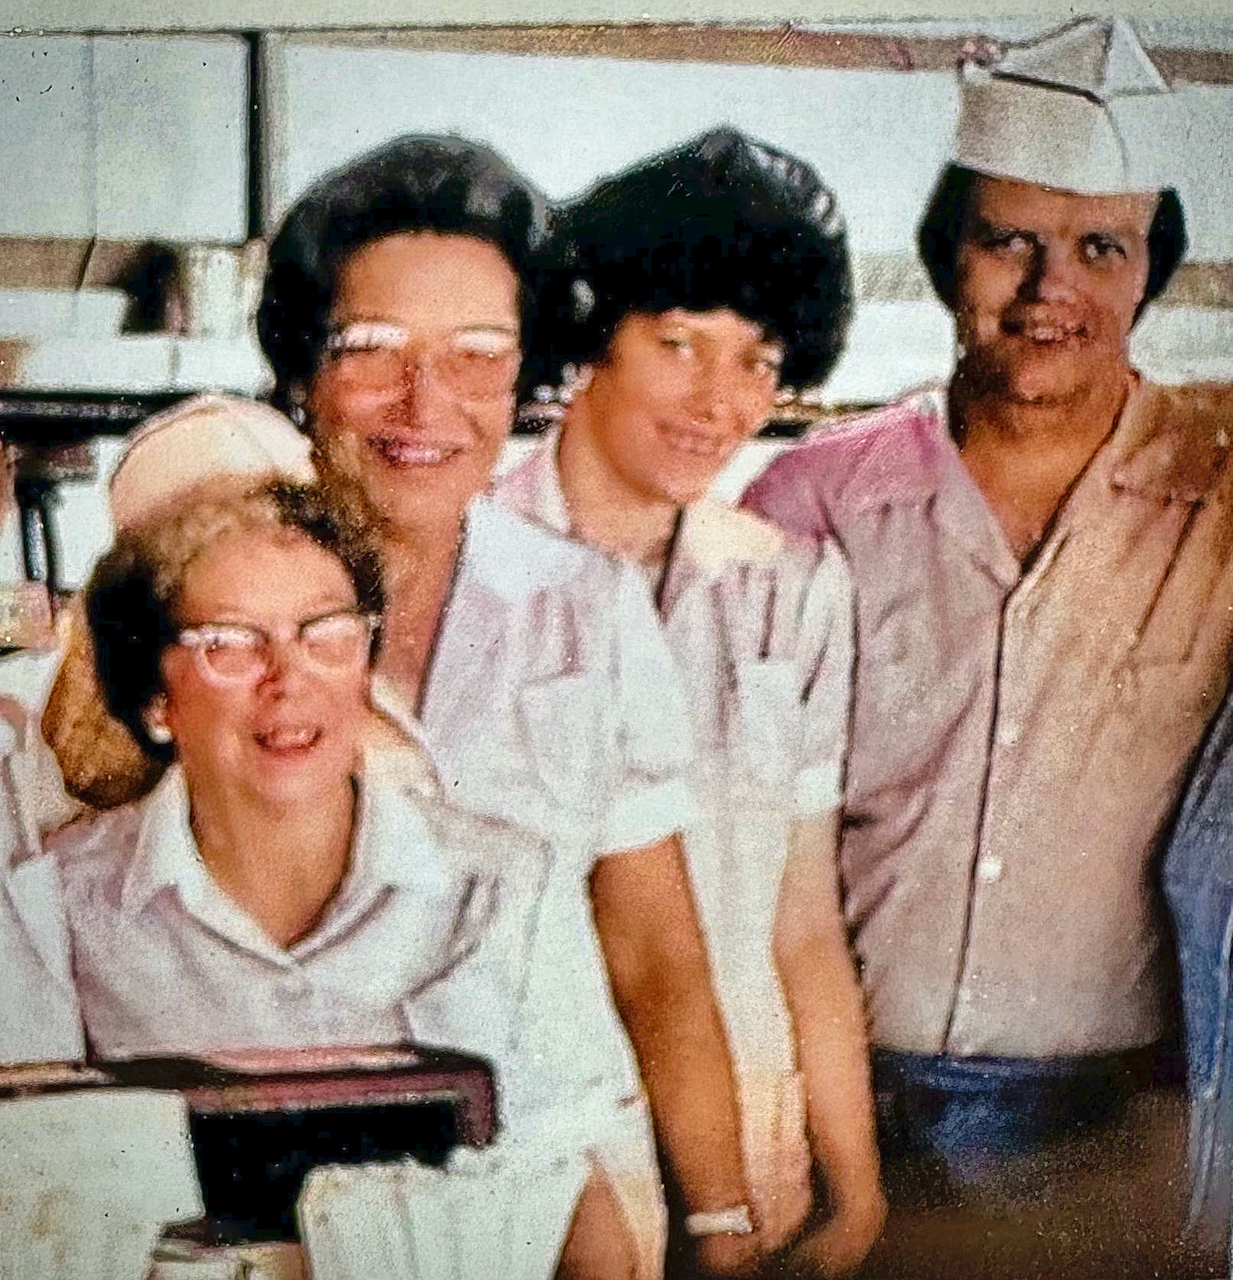 Carol Kelly and co-workers